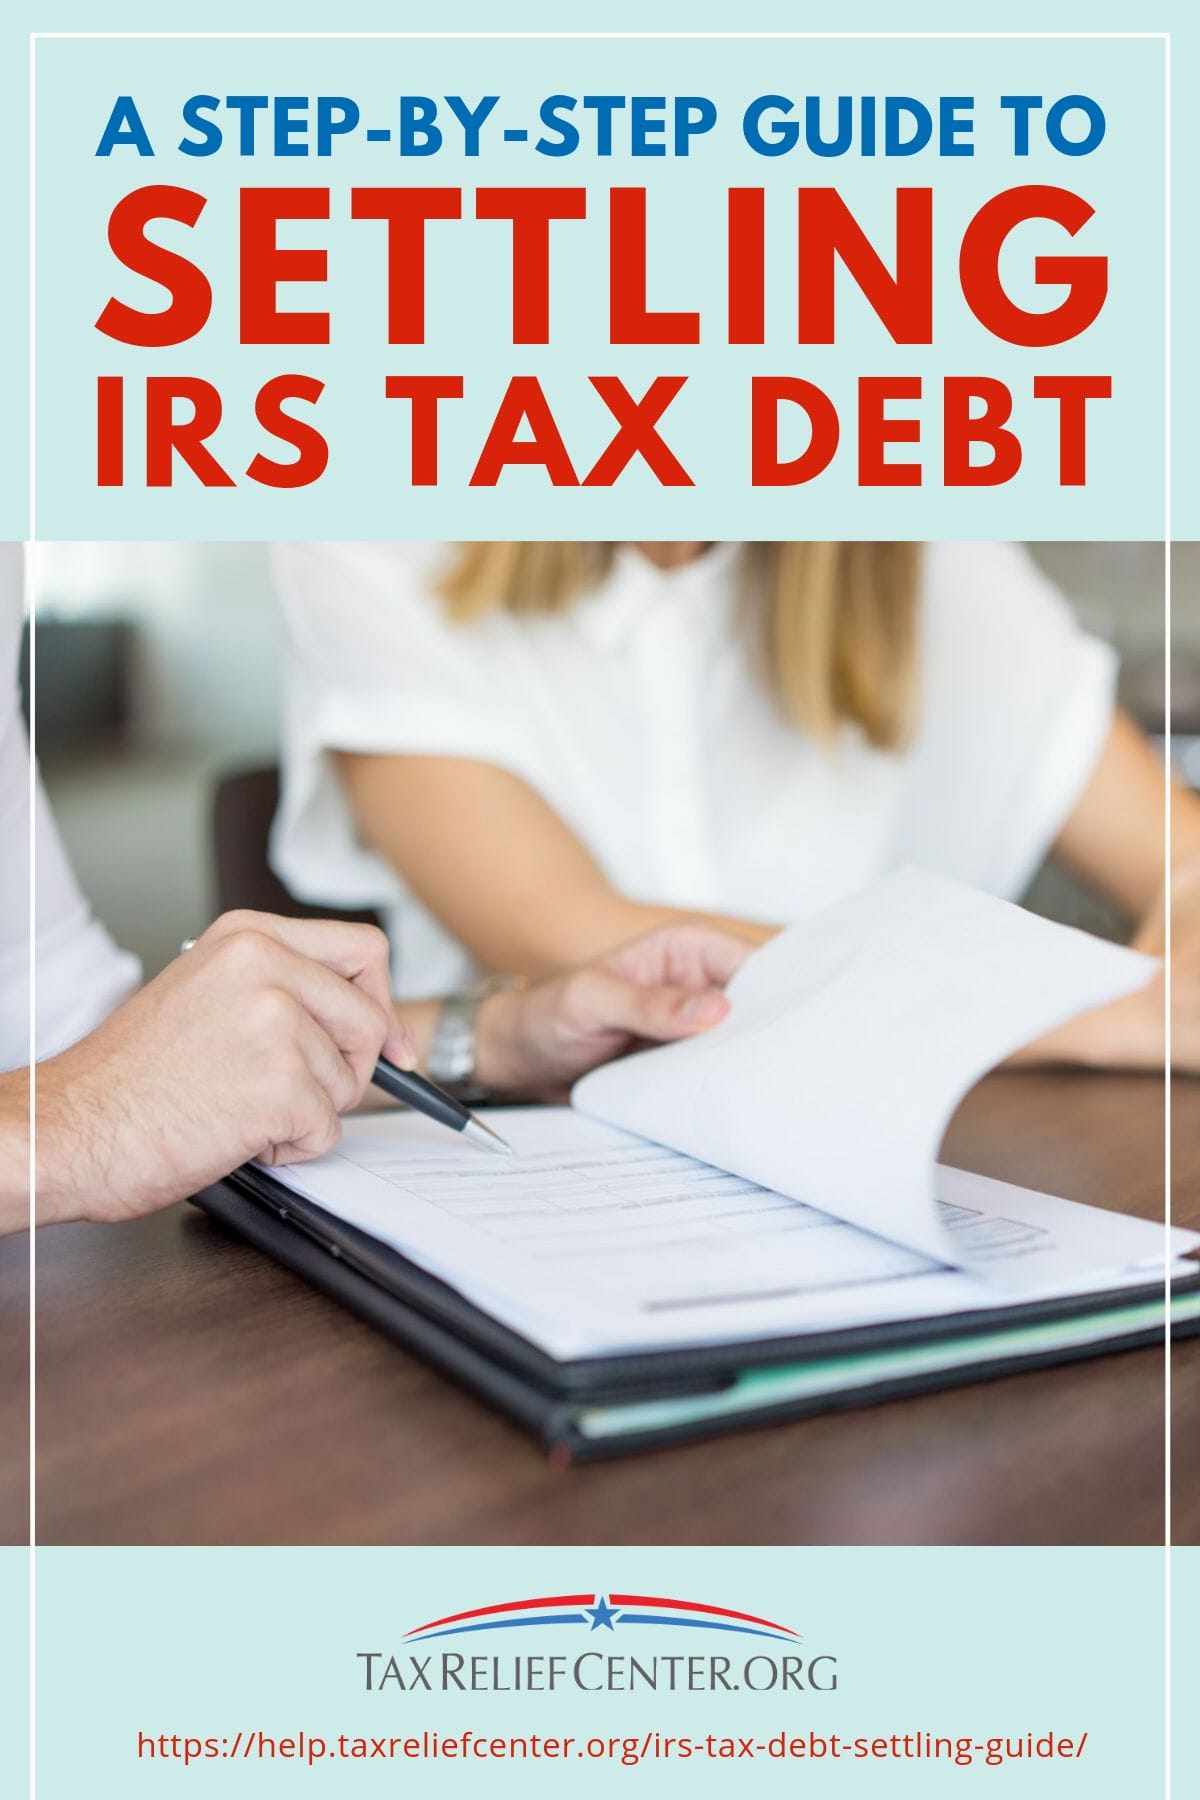 A Step-By-Step Guide To Settling IRS Tax Debt https://help.taxreliefcenter.org/irs-tax-debt-settling-guide/